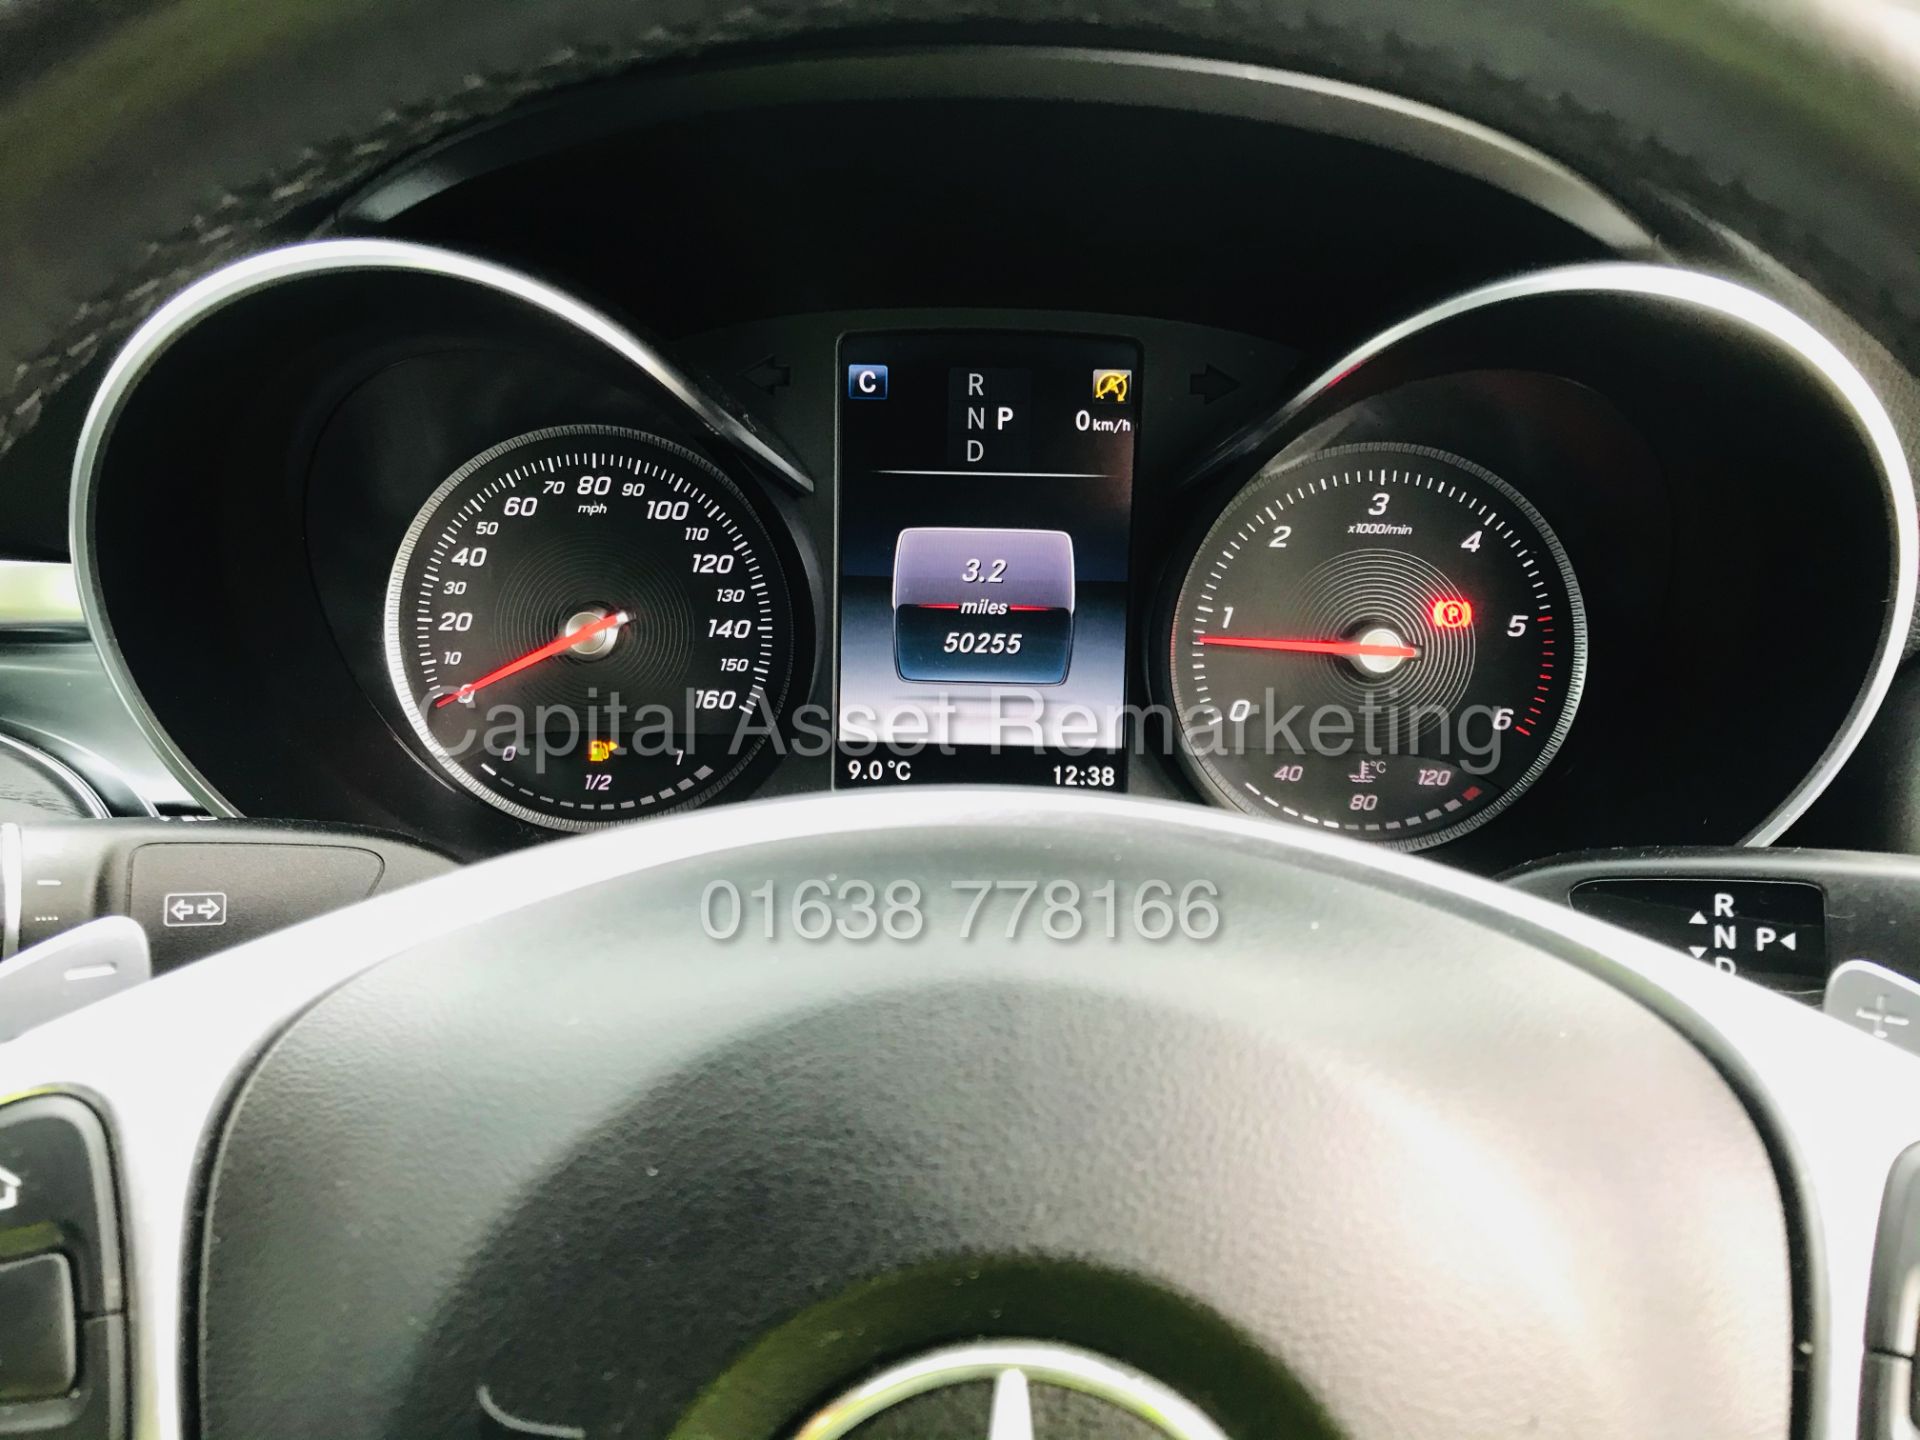 On Sale MERCEDES C220D "AMG-LINE" 9G TRONIC SALOON (18 REG) 1 OWNER WITH HISTORY - SAT NAV - - Image 18 of 36